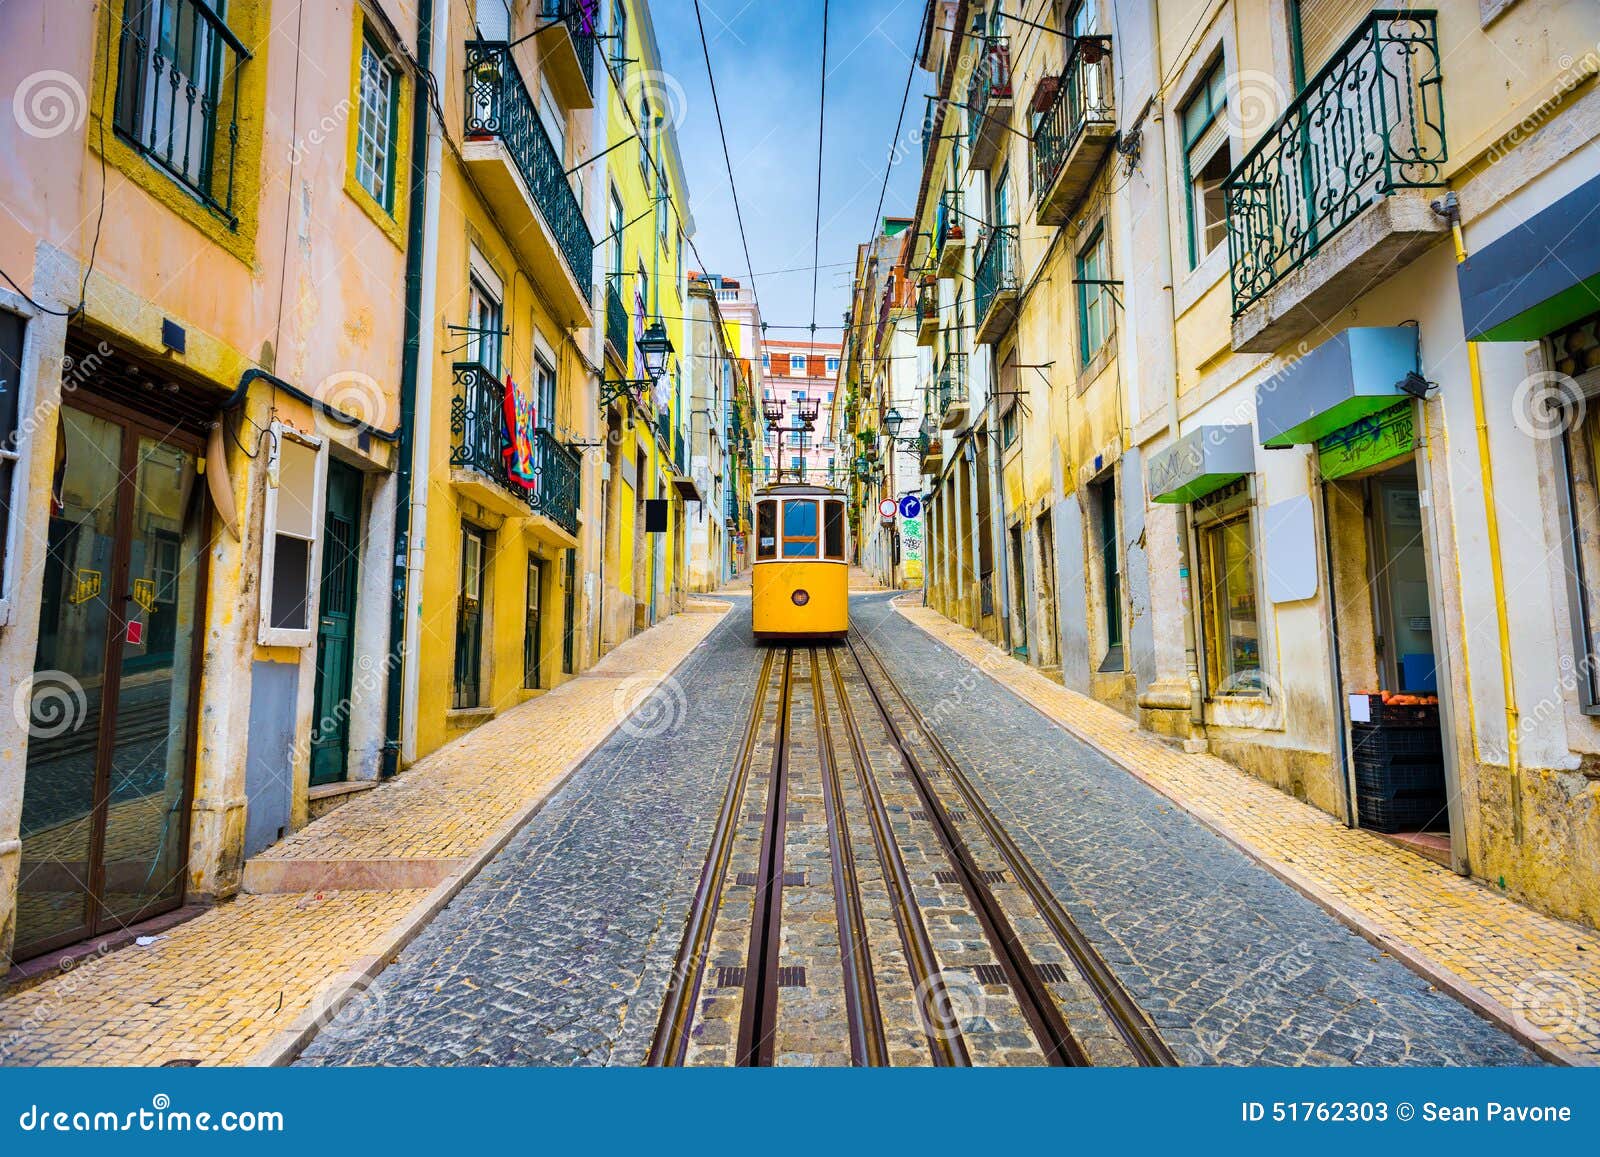 lisbon alley and tram